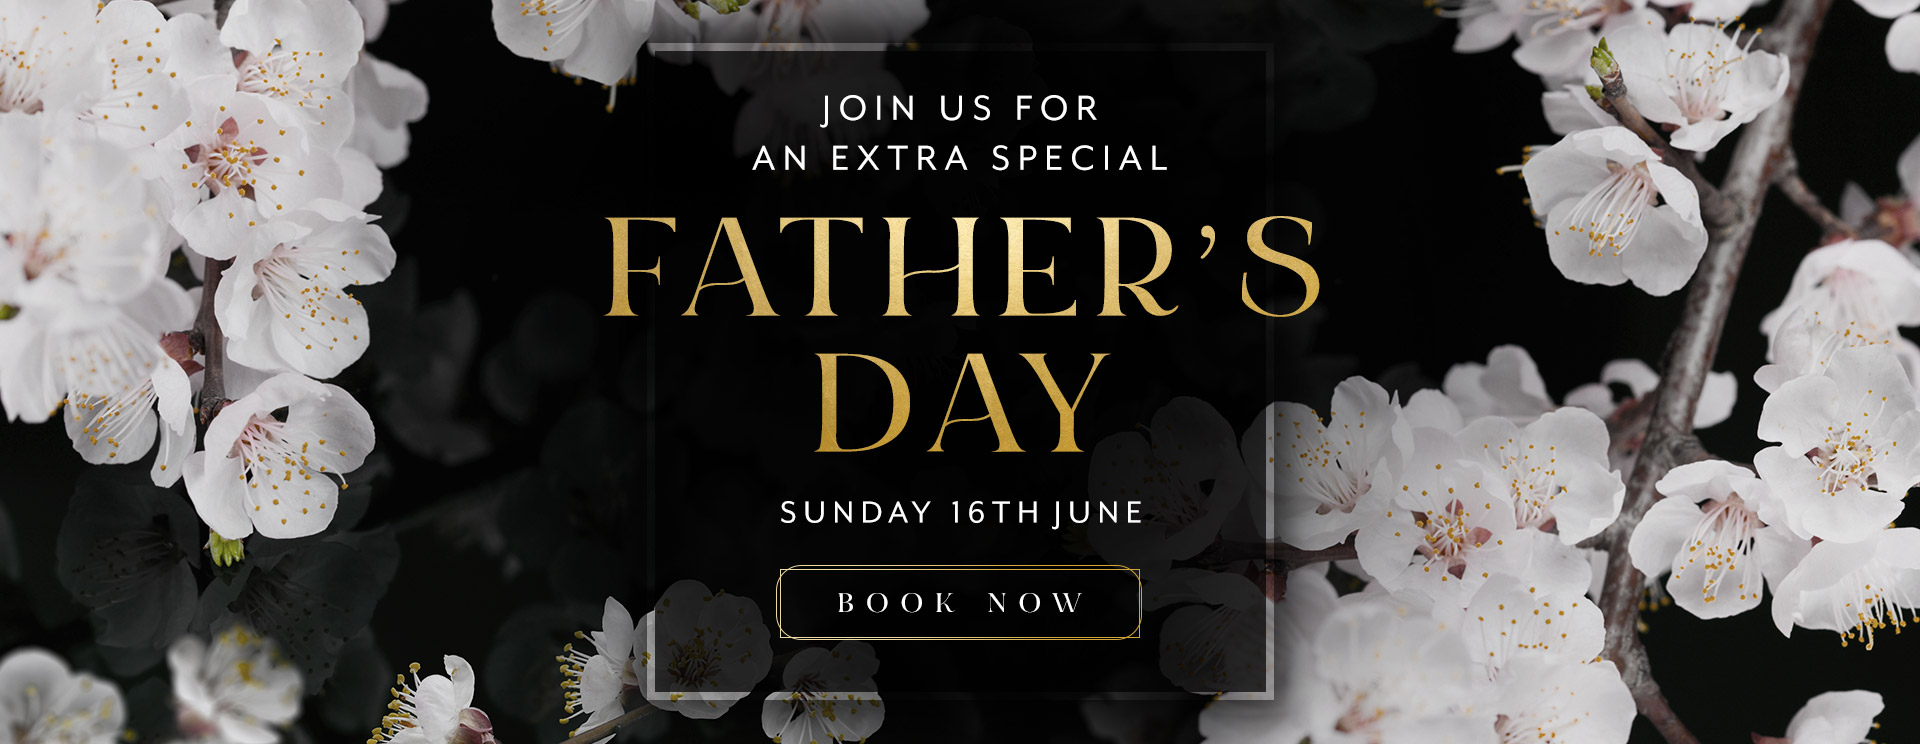 Father’s Day menu Liverpool